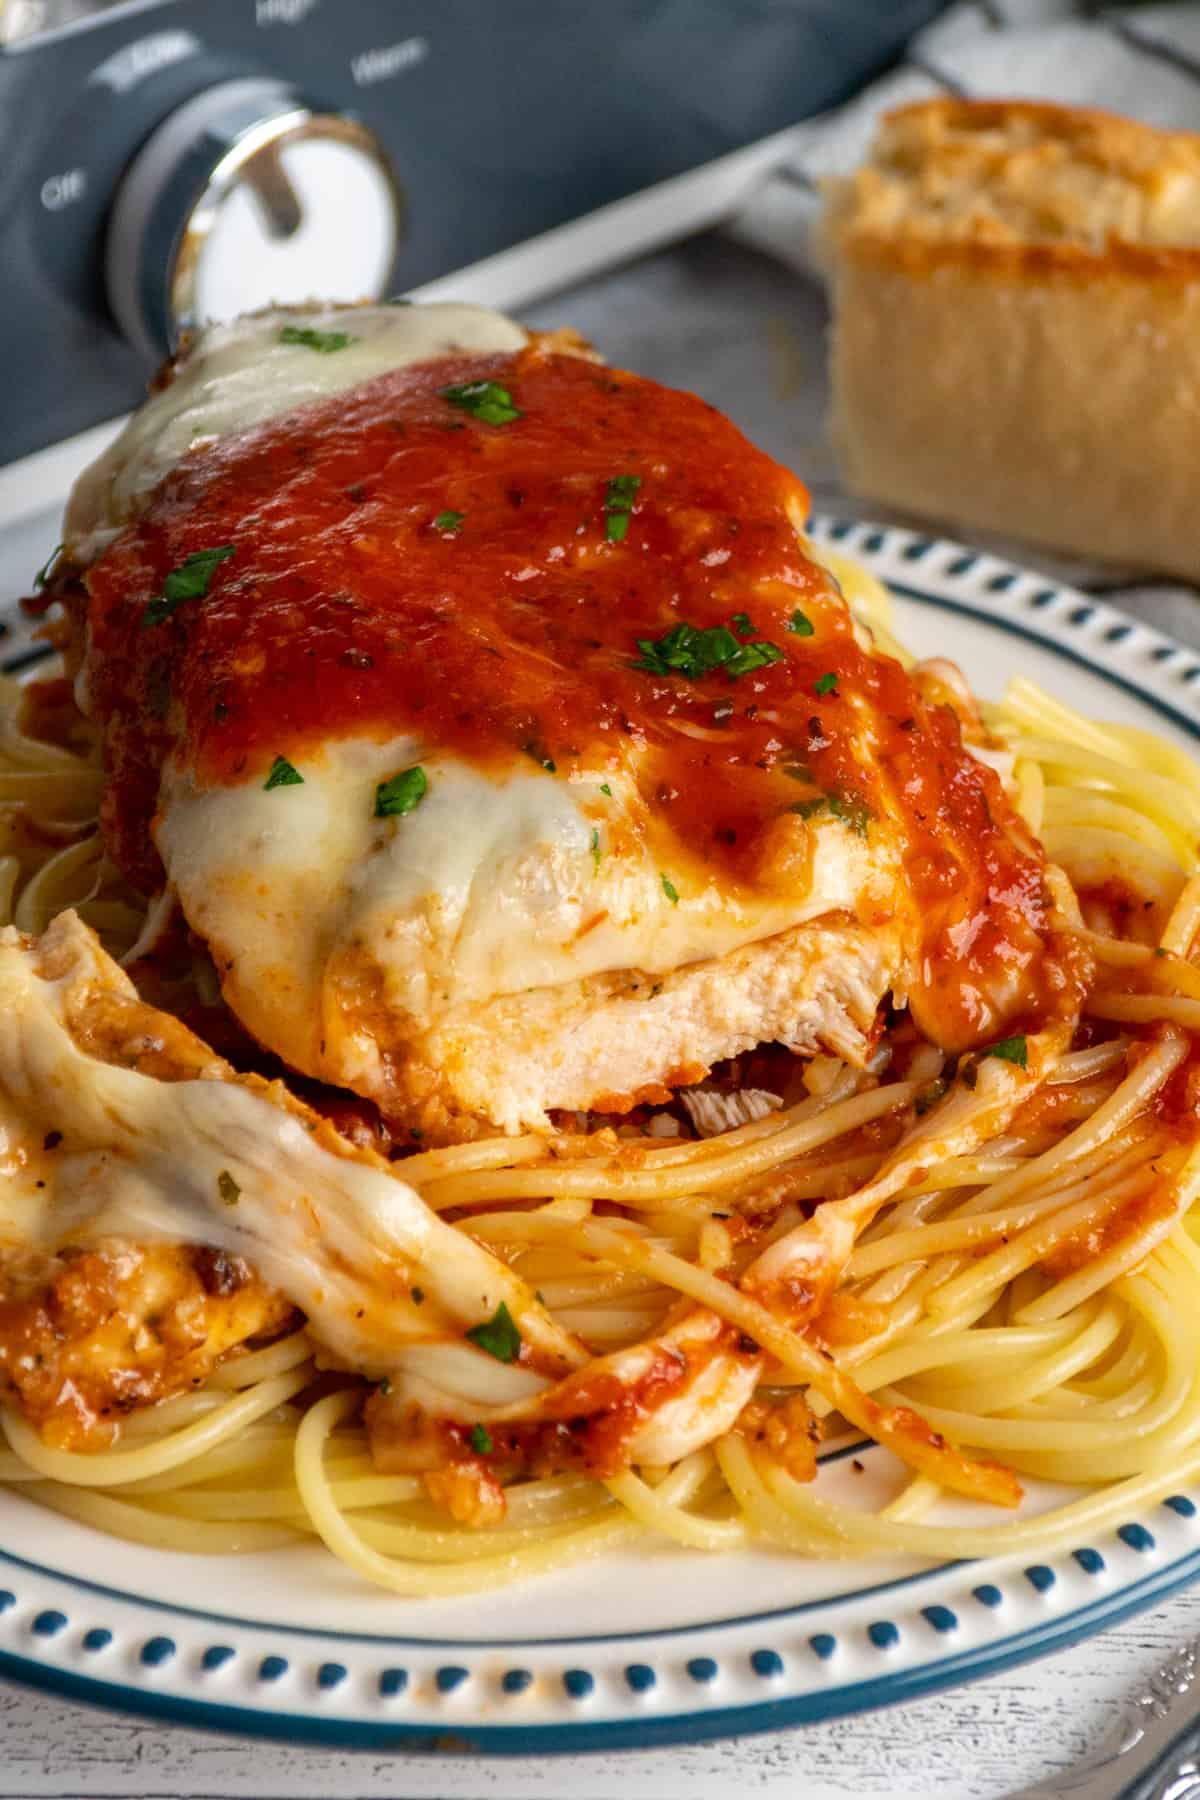 Chicken with mozzarella cheese and pasta sauce on it.